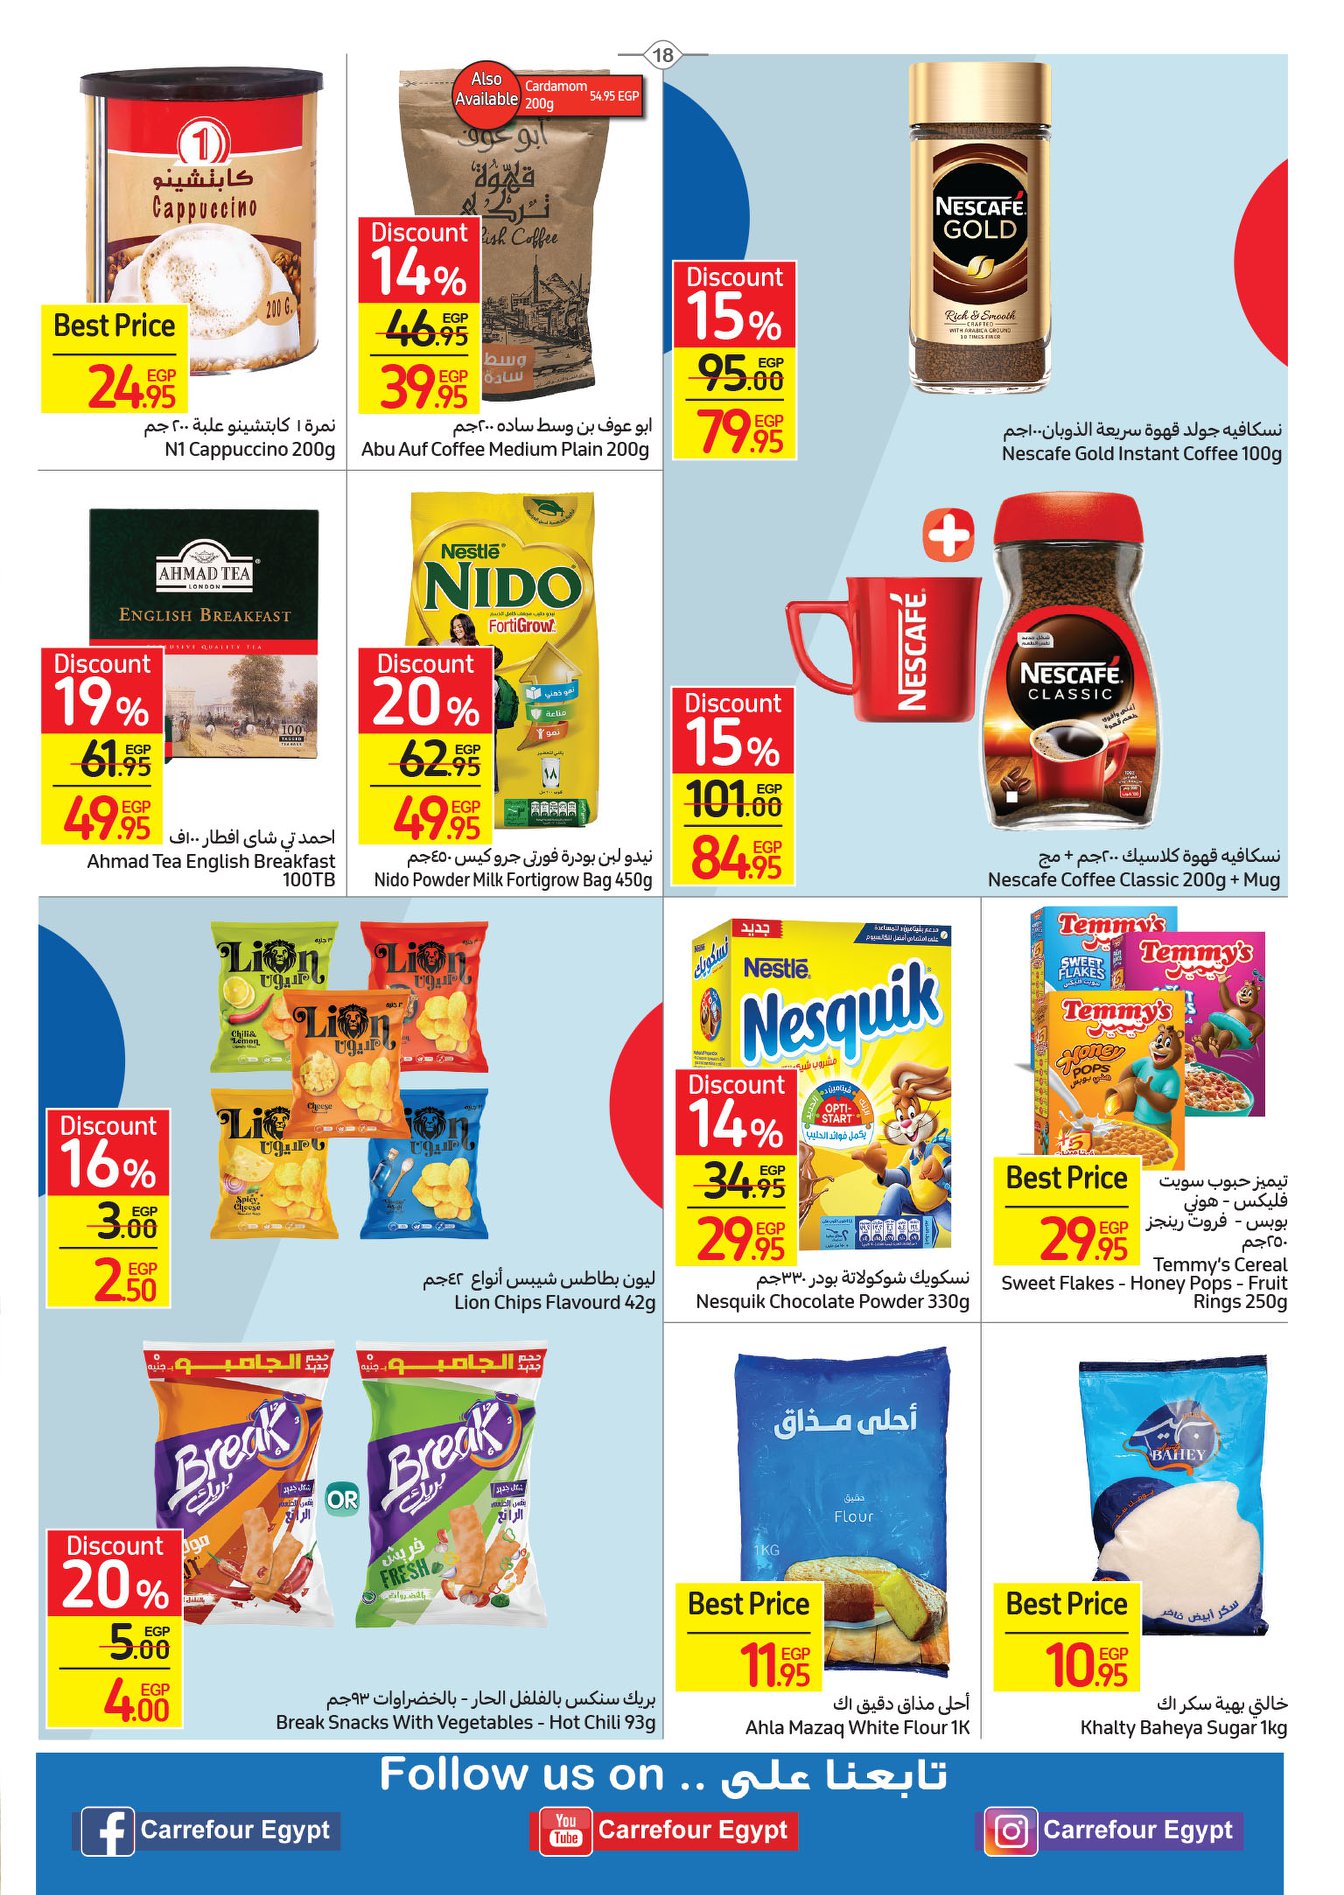 Enjoy now Carrefour's strongest offers from April 17-25, 2022.. Huge discounts on home essentials 7